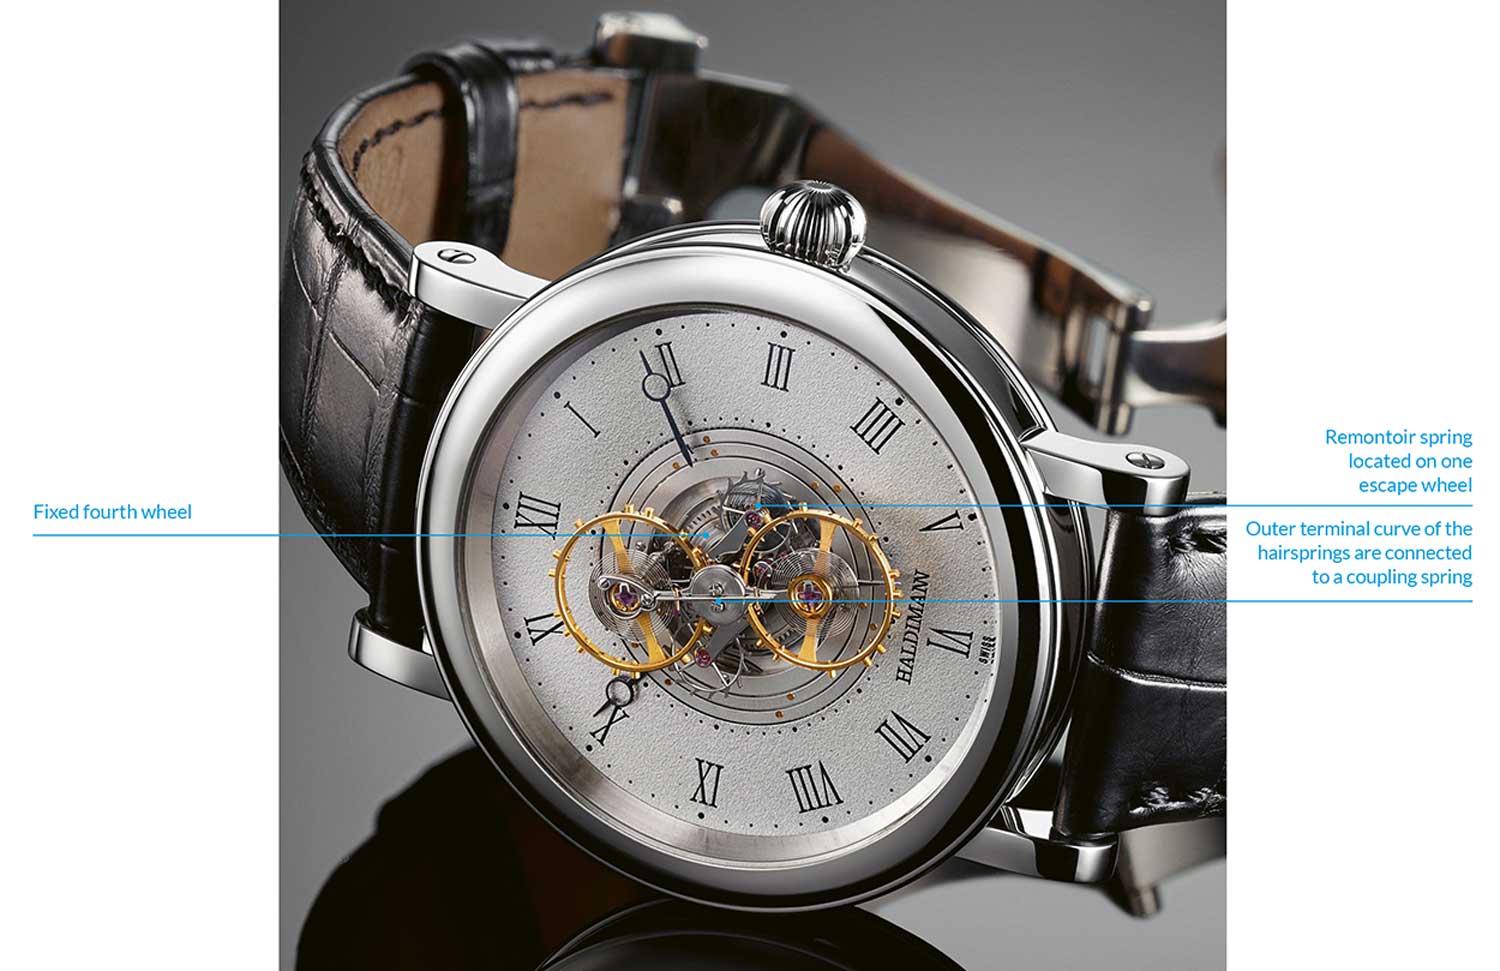 The ultra exotic Haldimann H2 Flying Resonance equipped with a double-balance flying tourbillon, which by definition relies on a single gear train